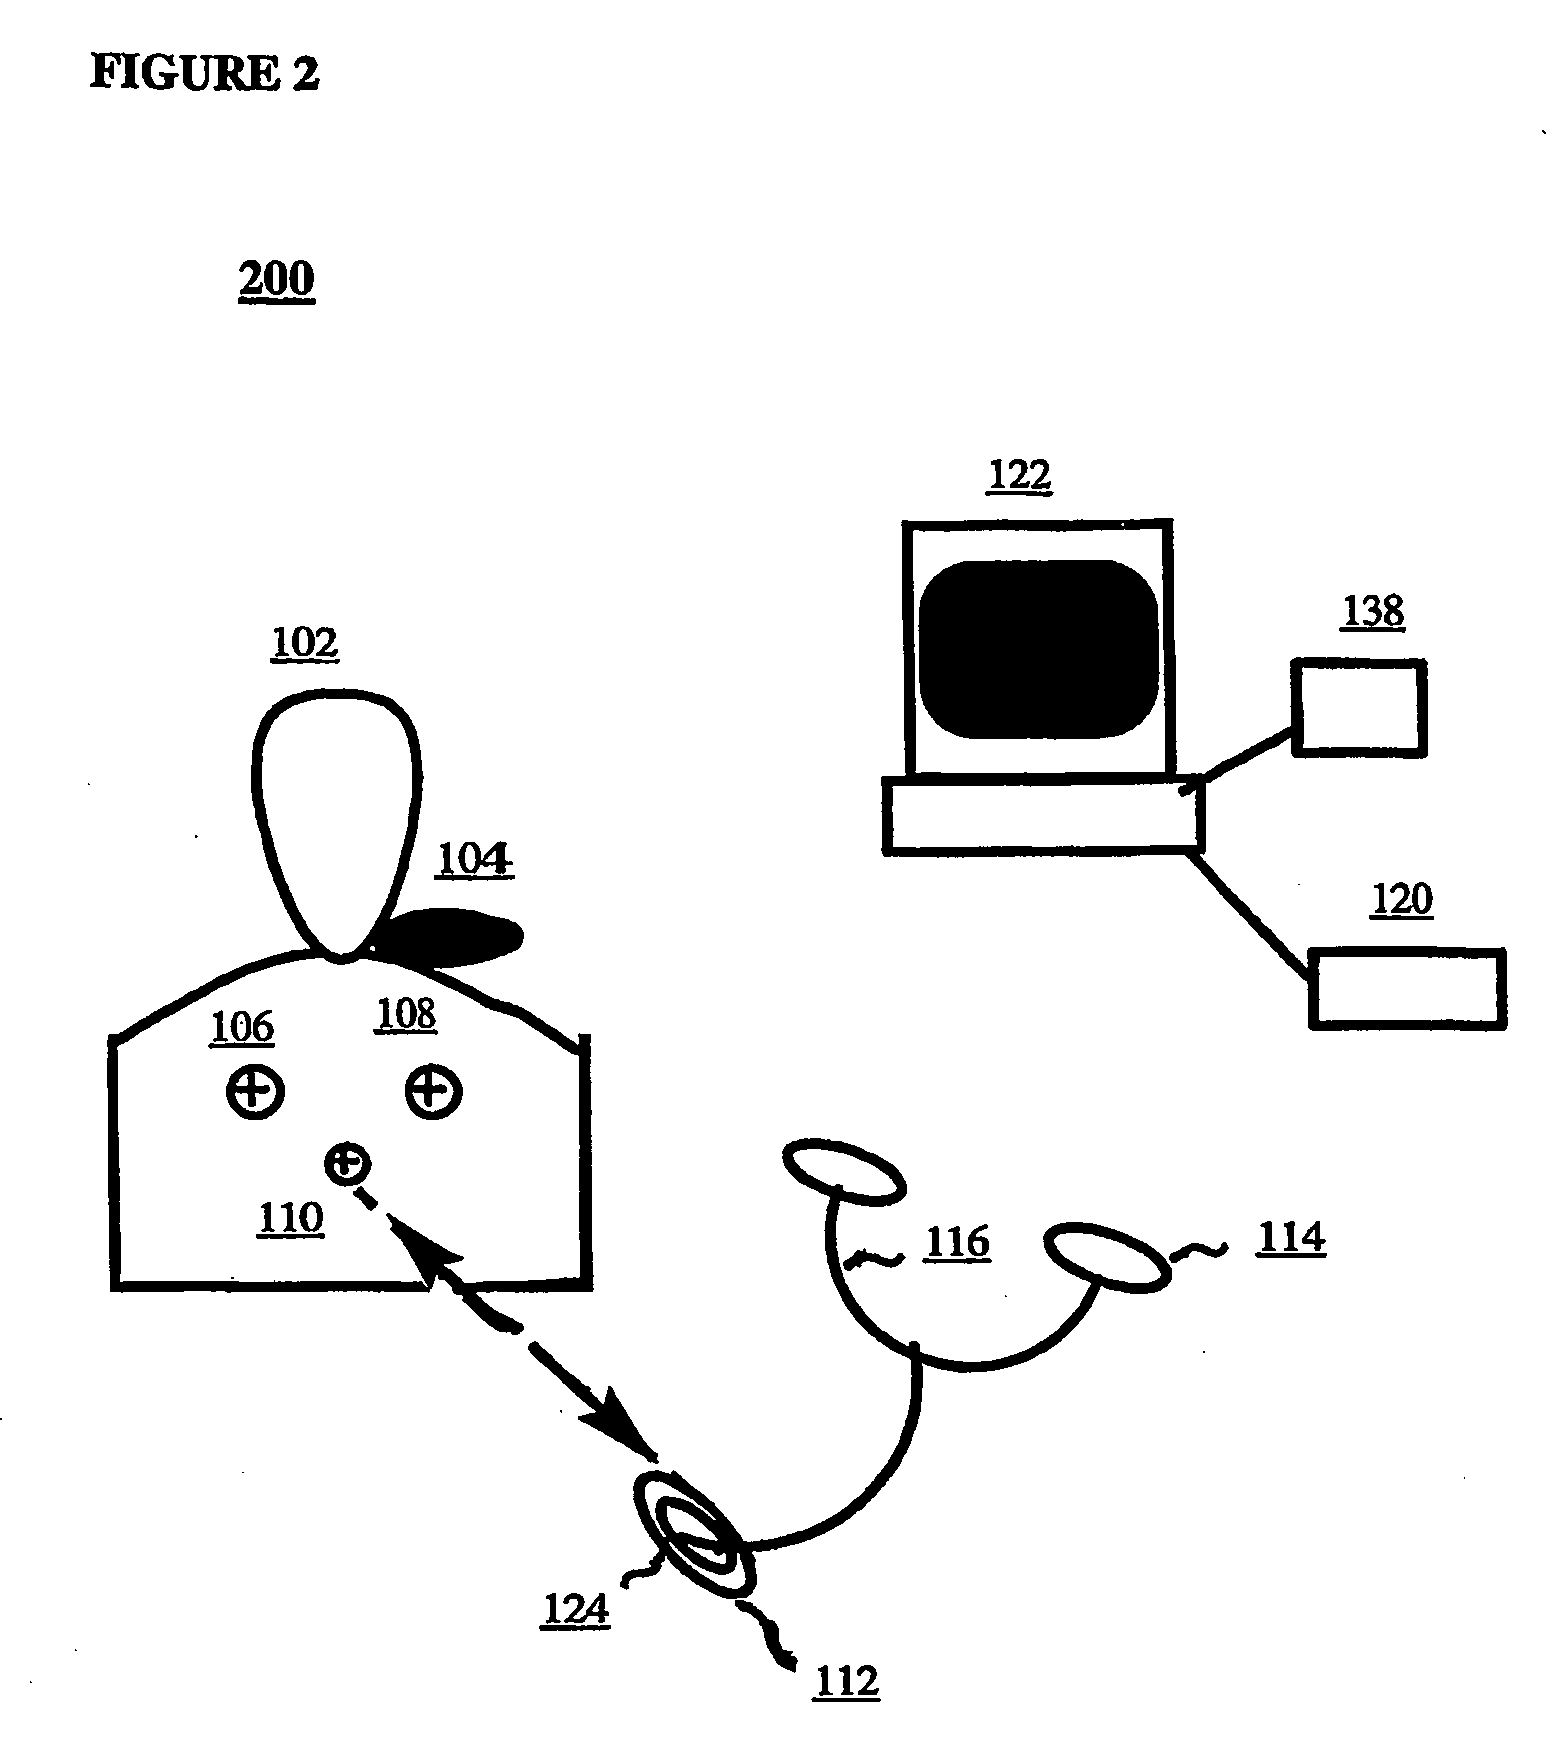 System, method and medium for simulating normal and abnormal medical conditions